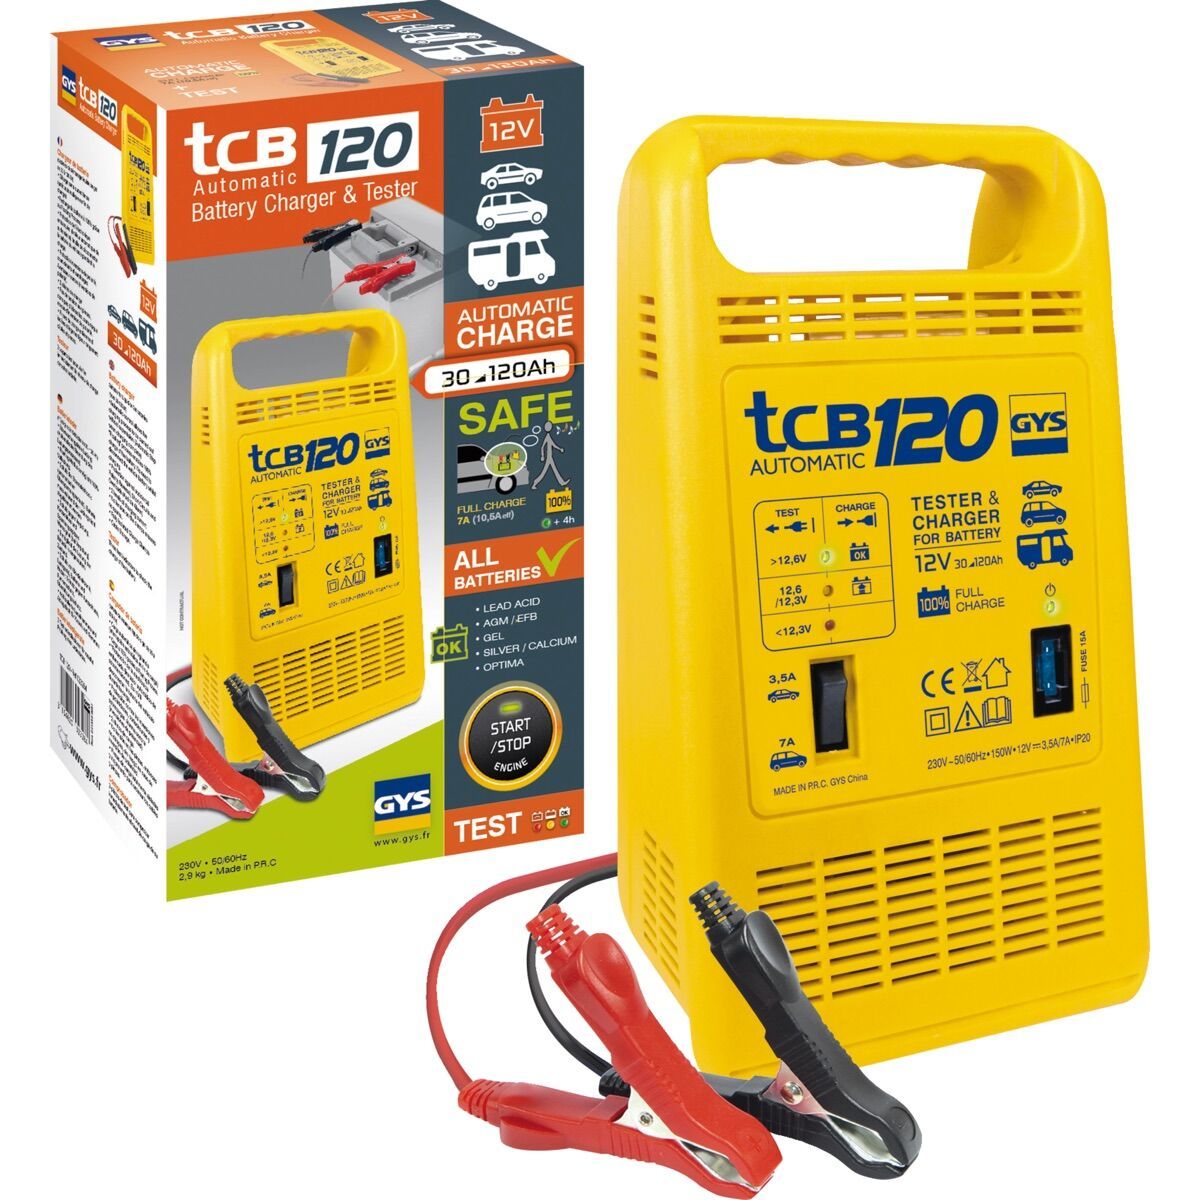 GYS TCB120A Automatic Charger & Tester (Yellow, 12 V)